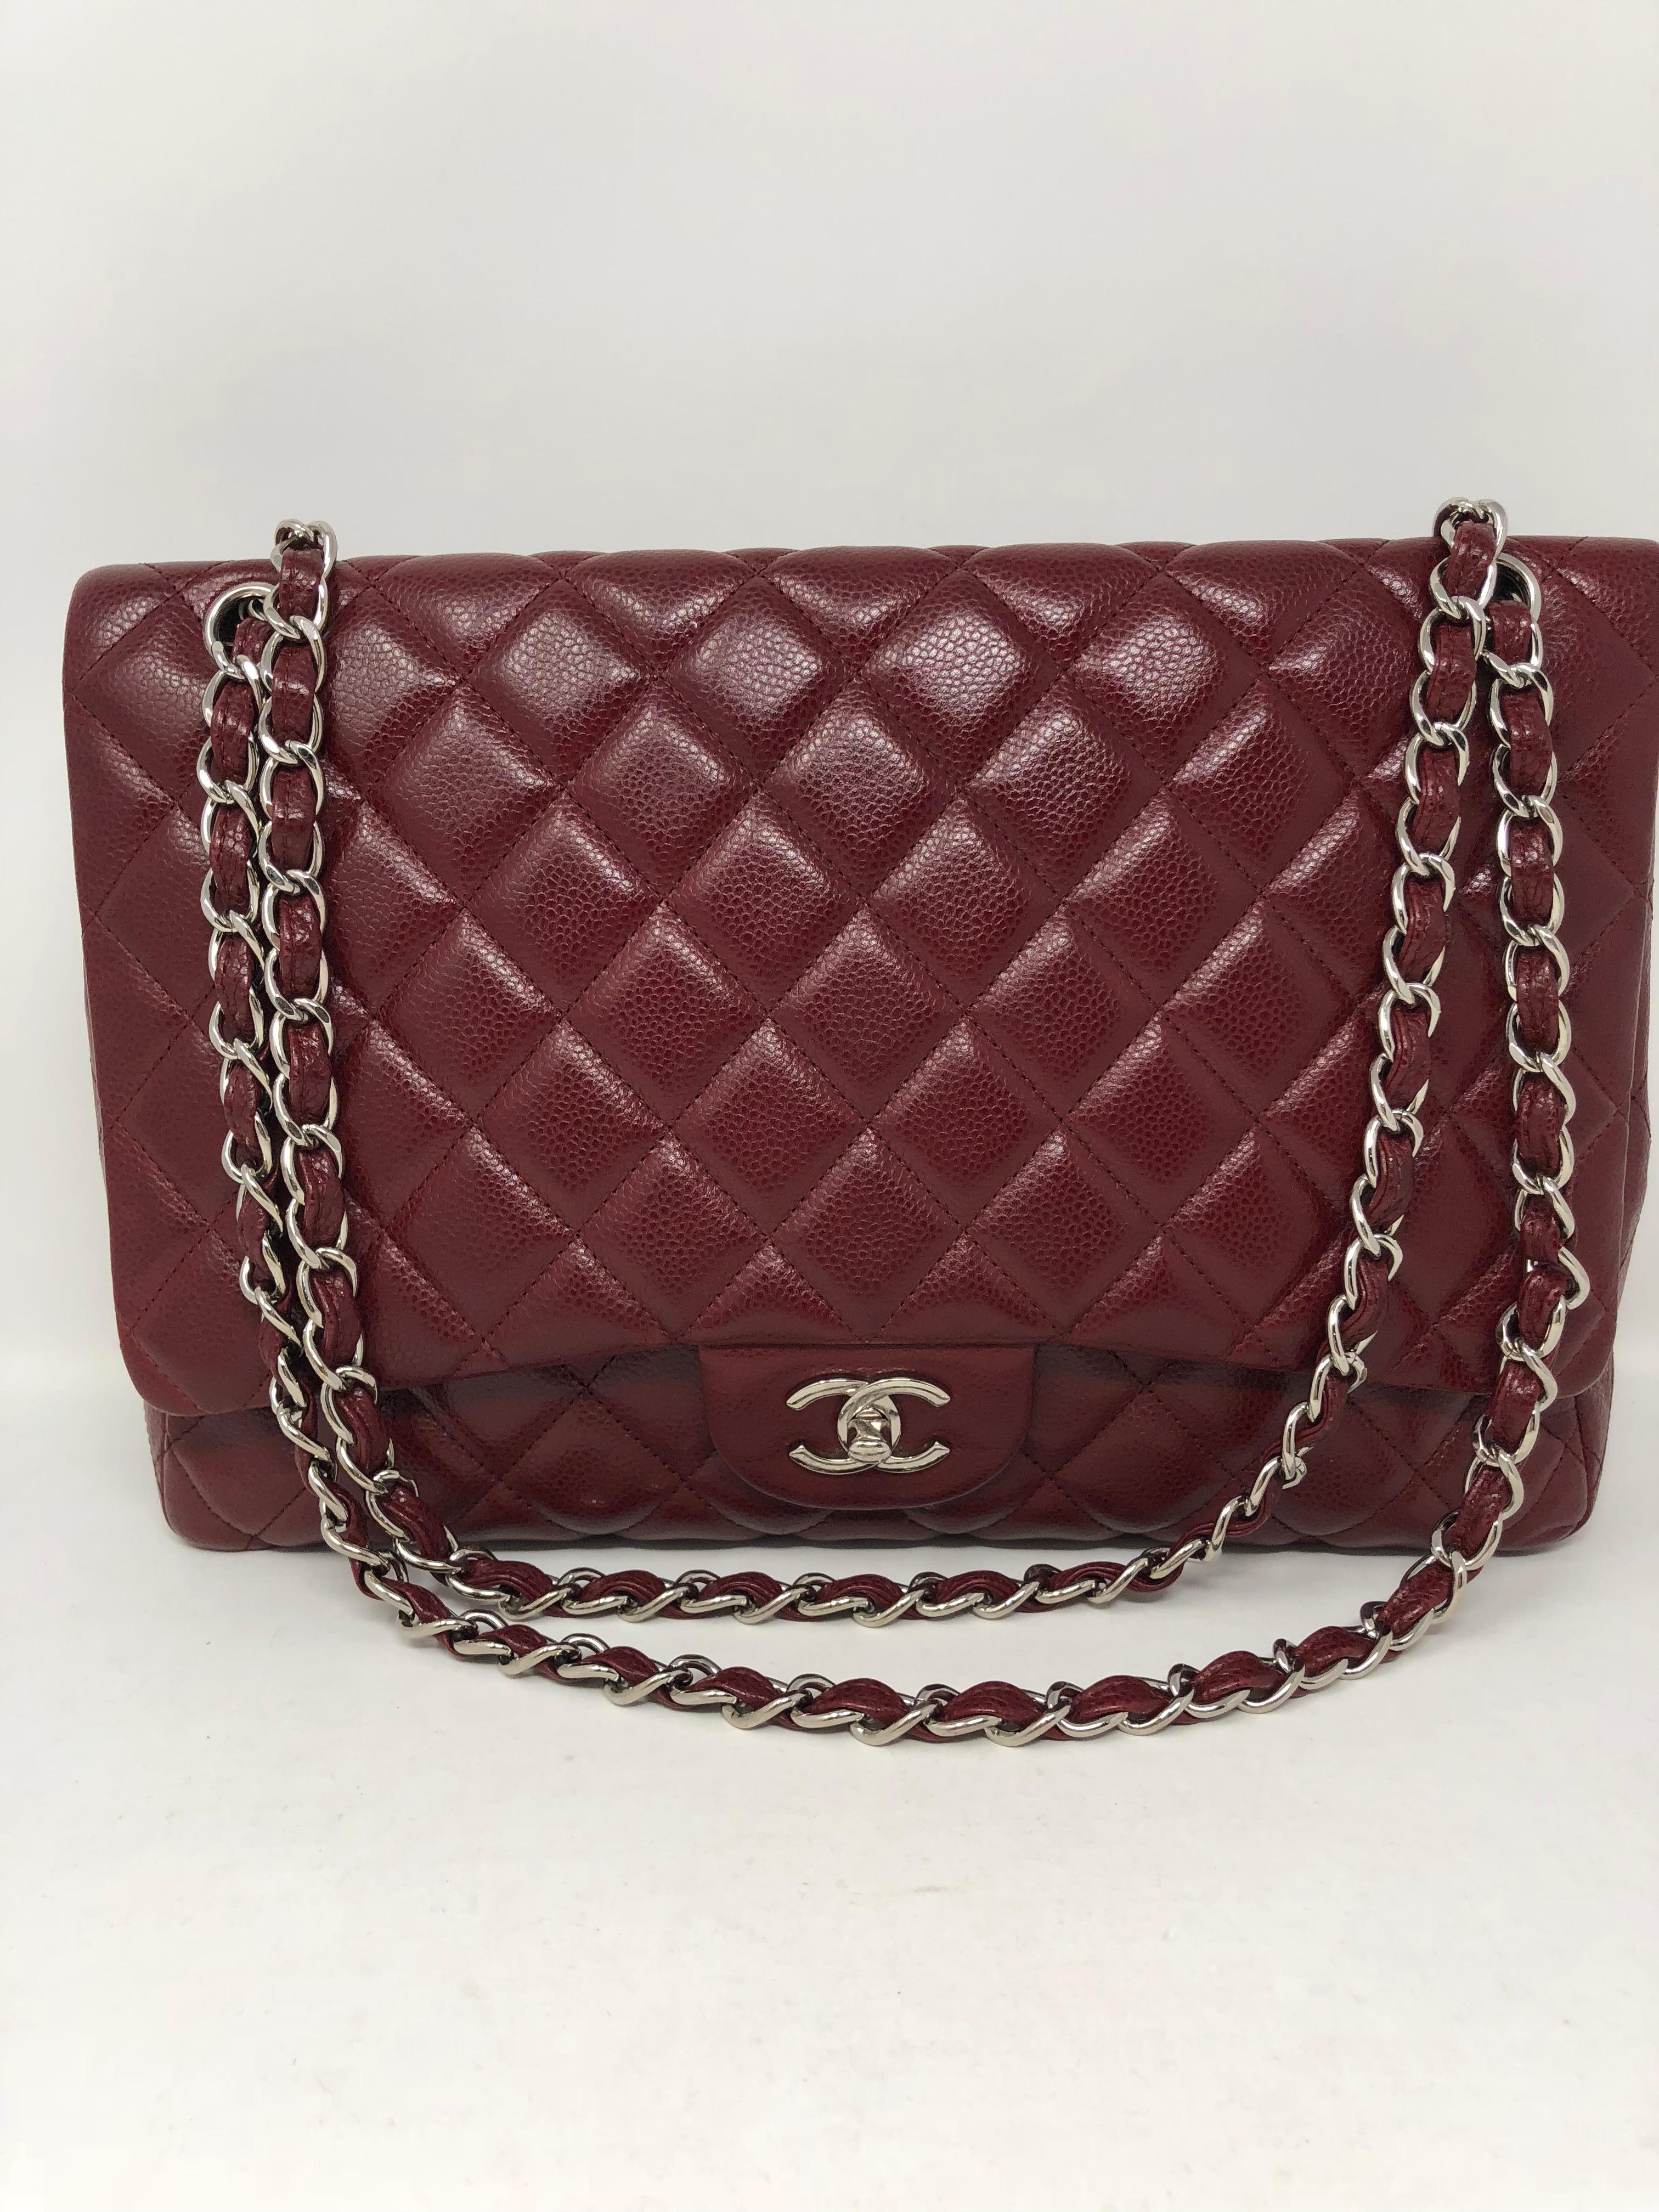 Women's or Men's Chanel Burgundy Caviar Leather Maxi